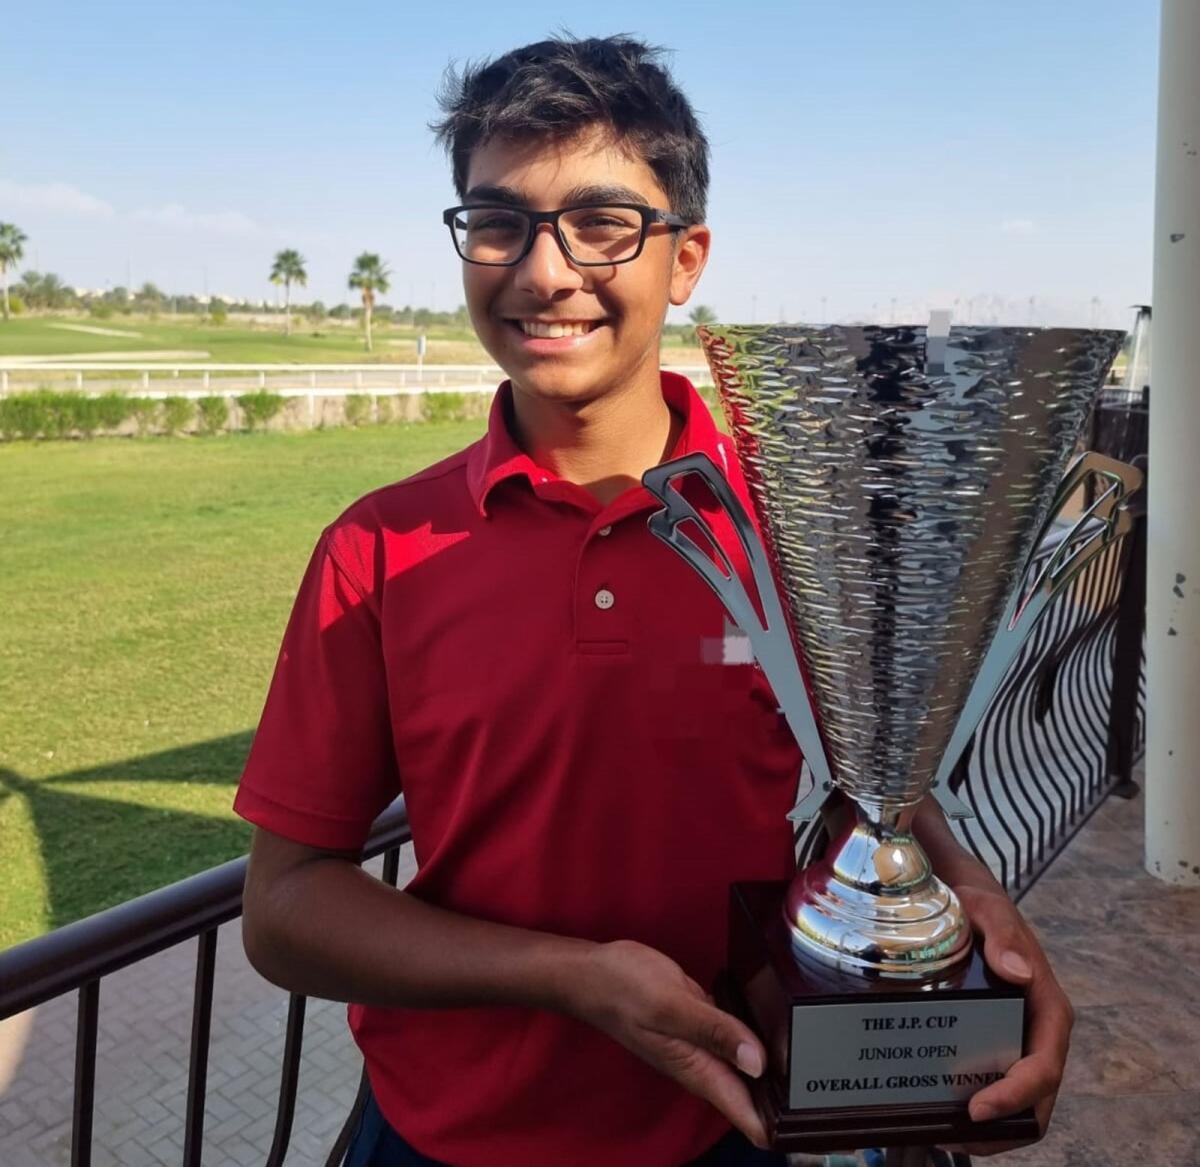 Rayan Ahmed has been busy collecting trophies and breaking course records. - Instagram